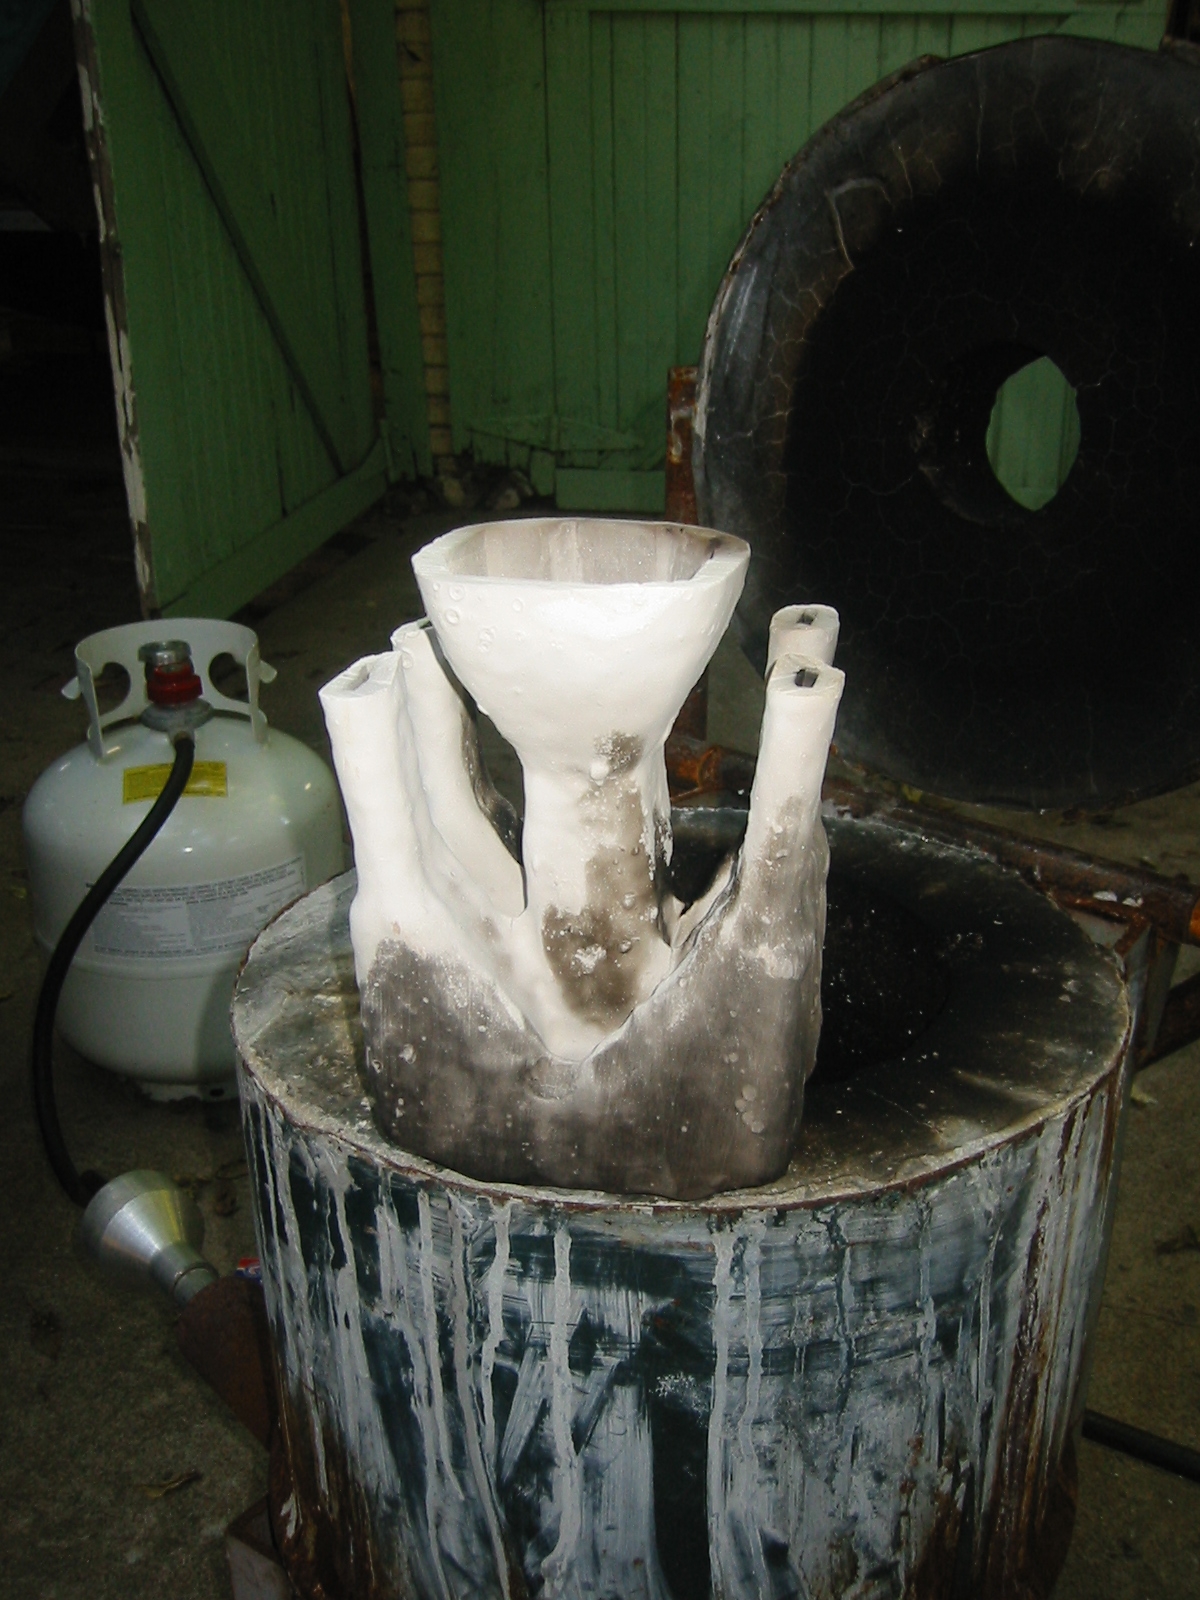 (3) The mold has be fired in the foundry after the foam was dissolved with acetone.